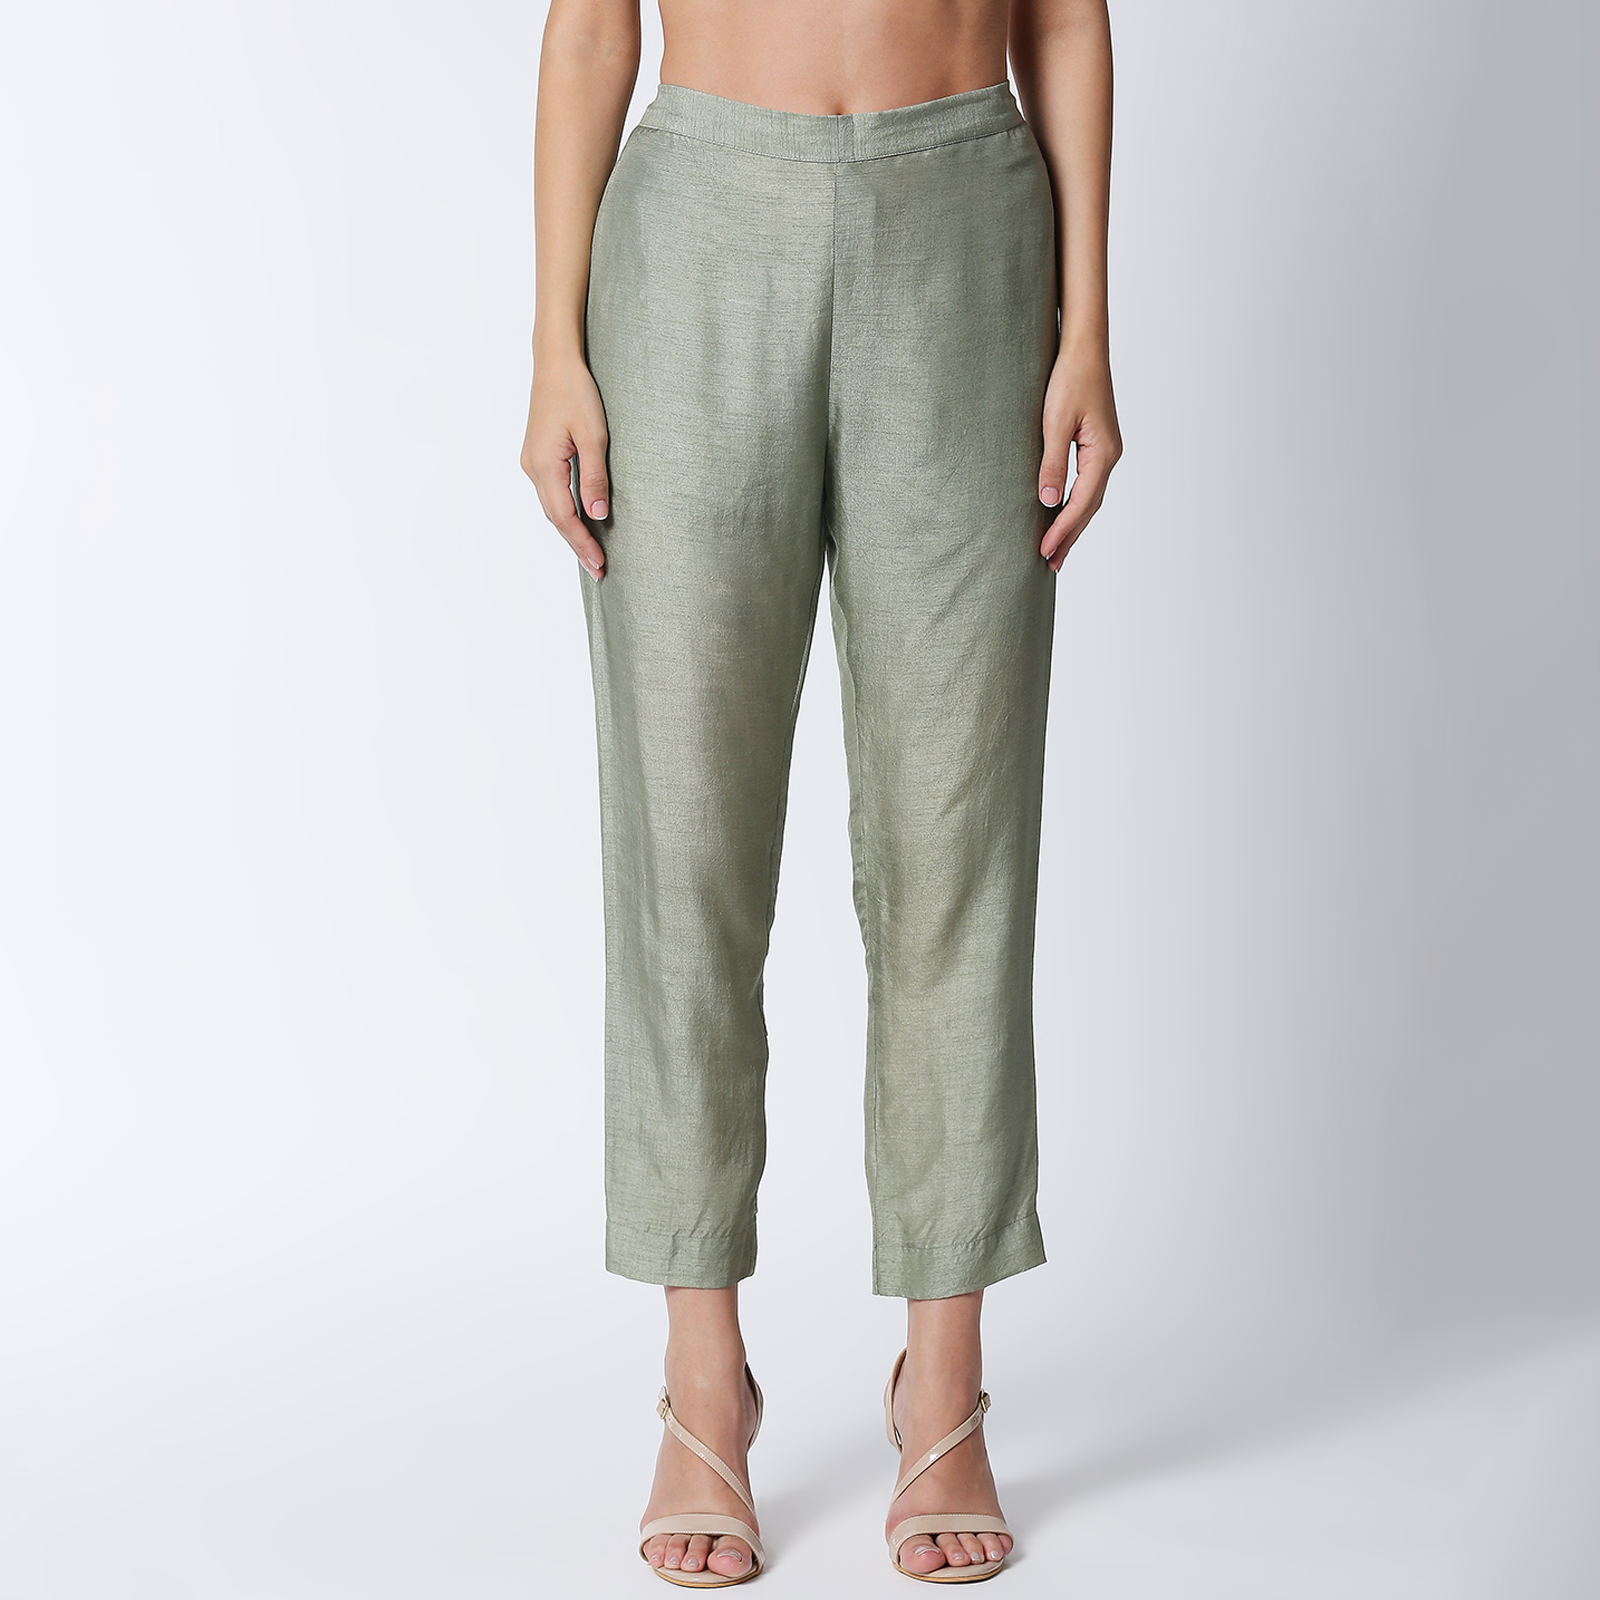 Moncler Grenoble Slim-Fit Cropped Trousers | Neiman Marcus